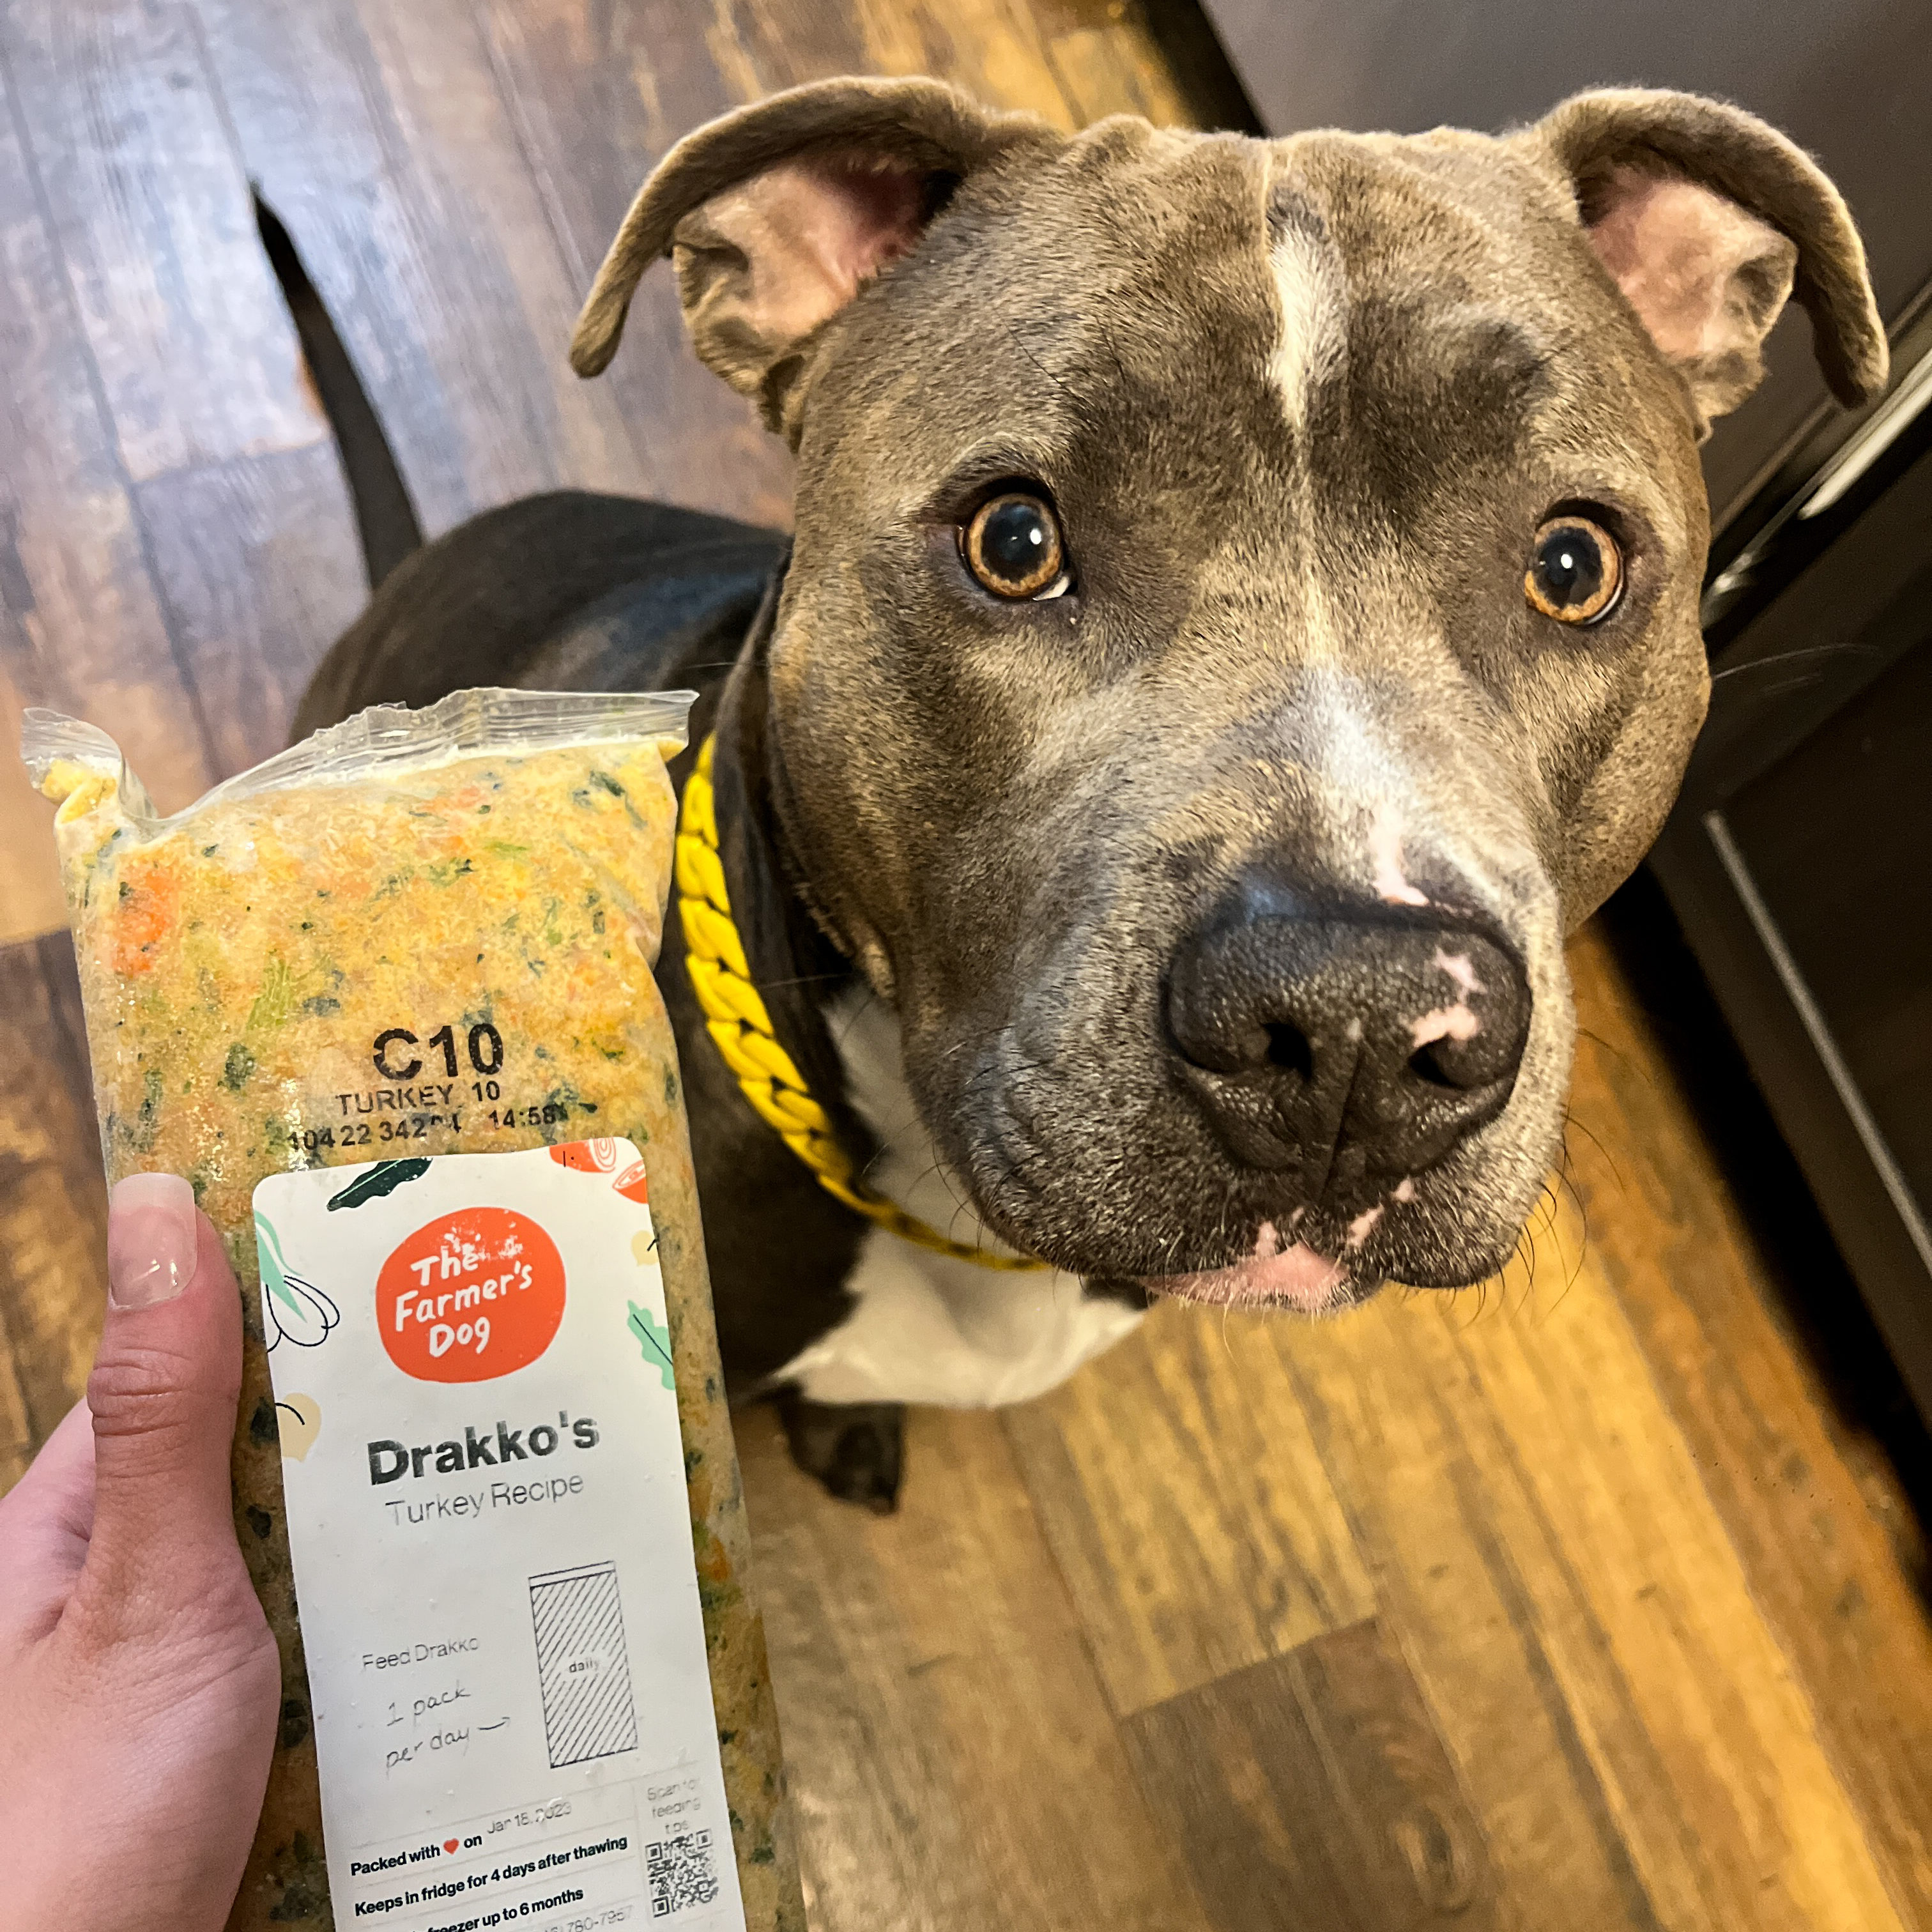 I Went Through A LOT of Different Pet Food Brands For My Dog – Here’s Why This One Stuck